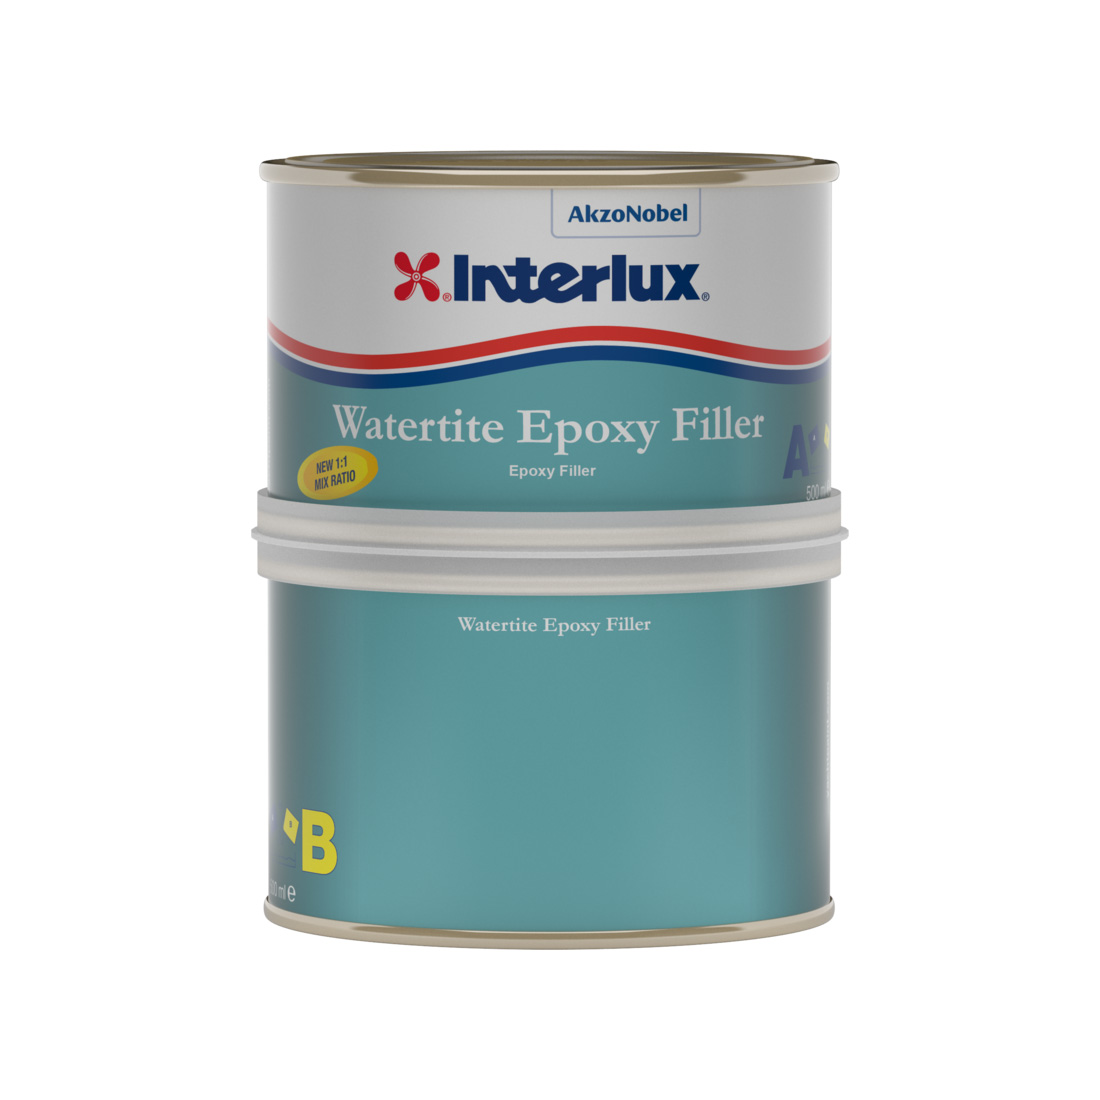 Interlux Watertite Epoxy Filler YAV135 is a two-part, easy to use, fast dry...